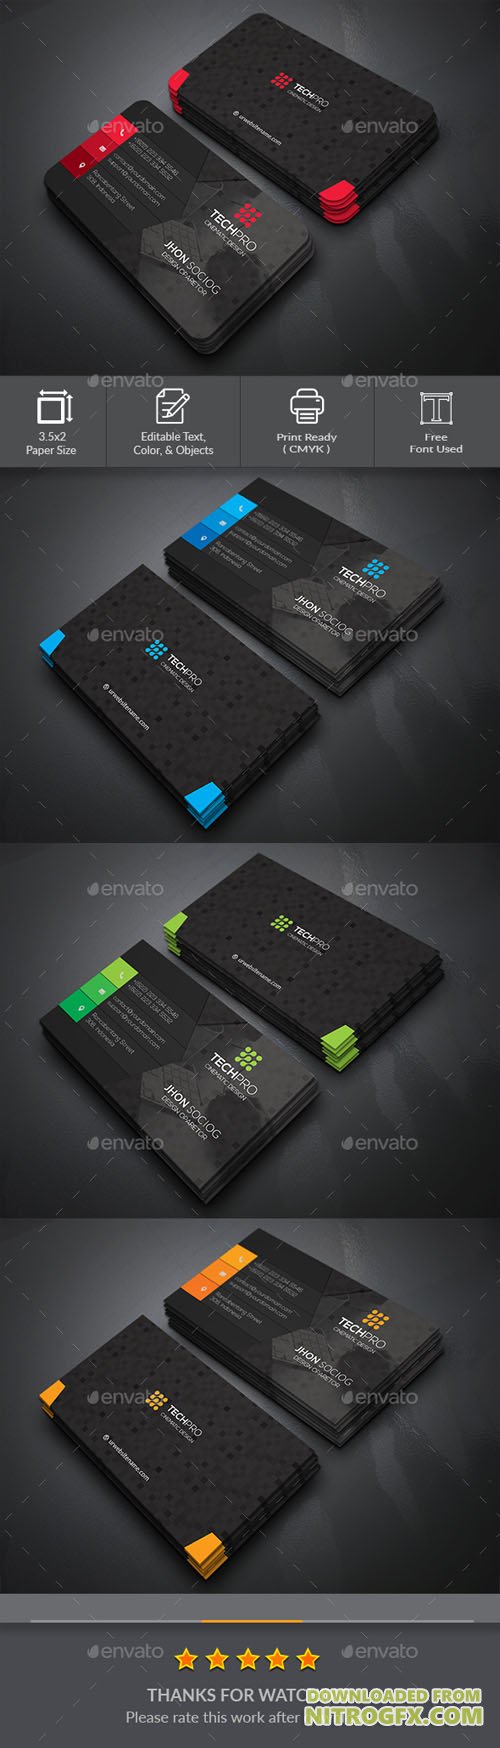 GraphicRiver - Business Card - 20628725